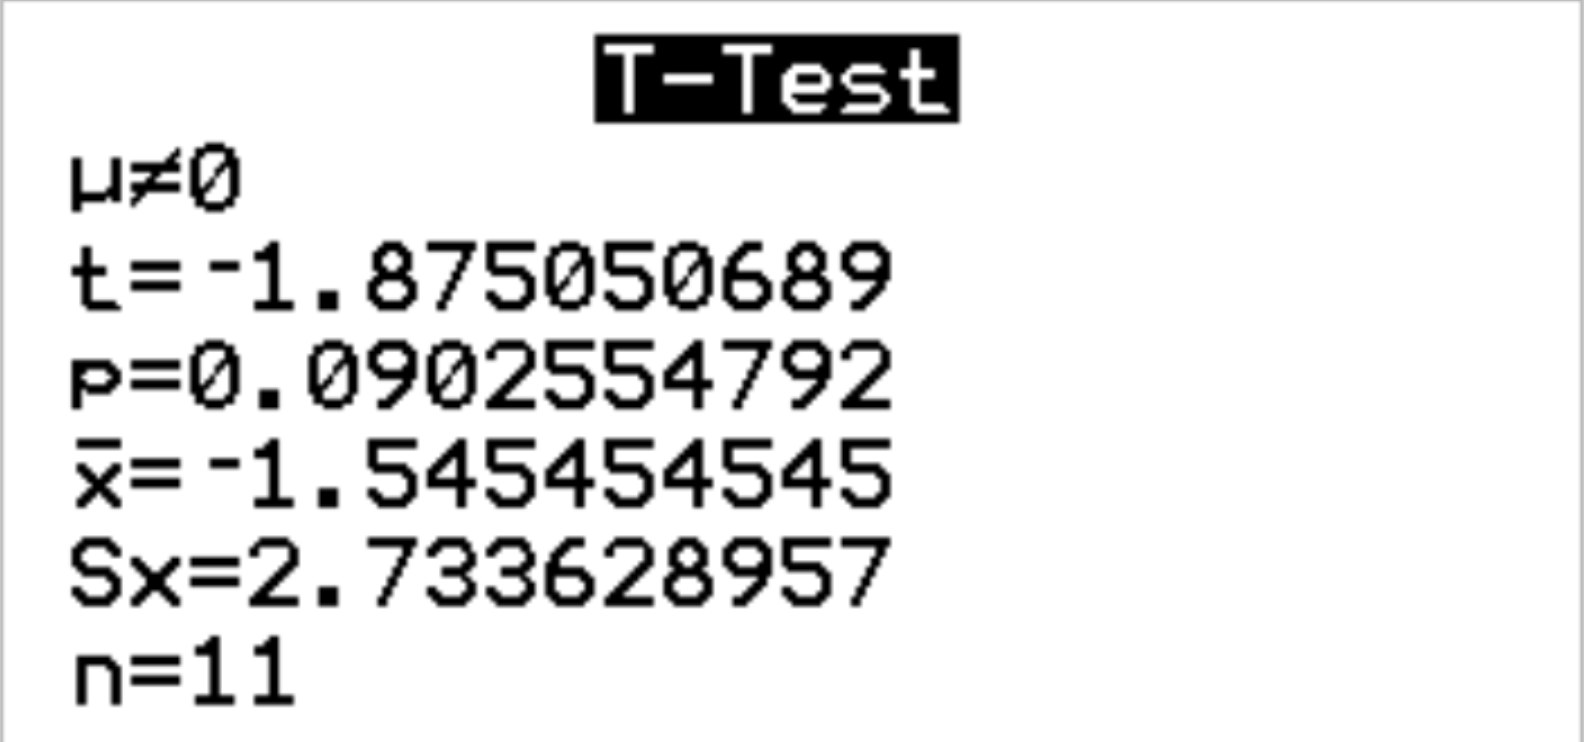 Output of paired t-test on TI-84 calculator